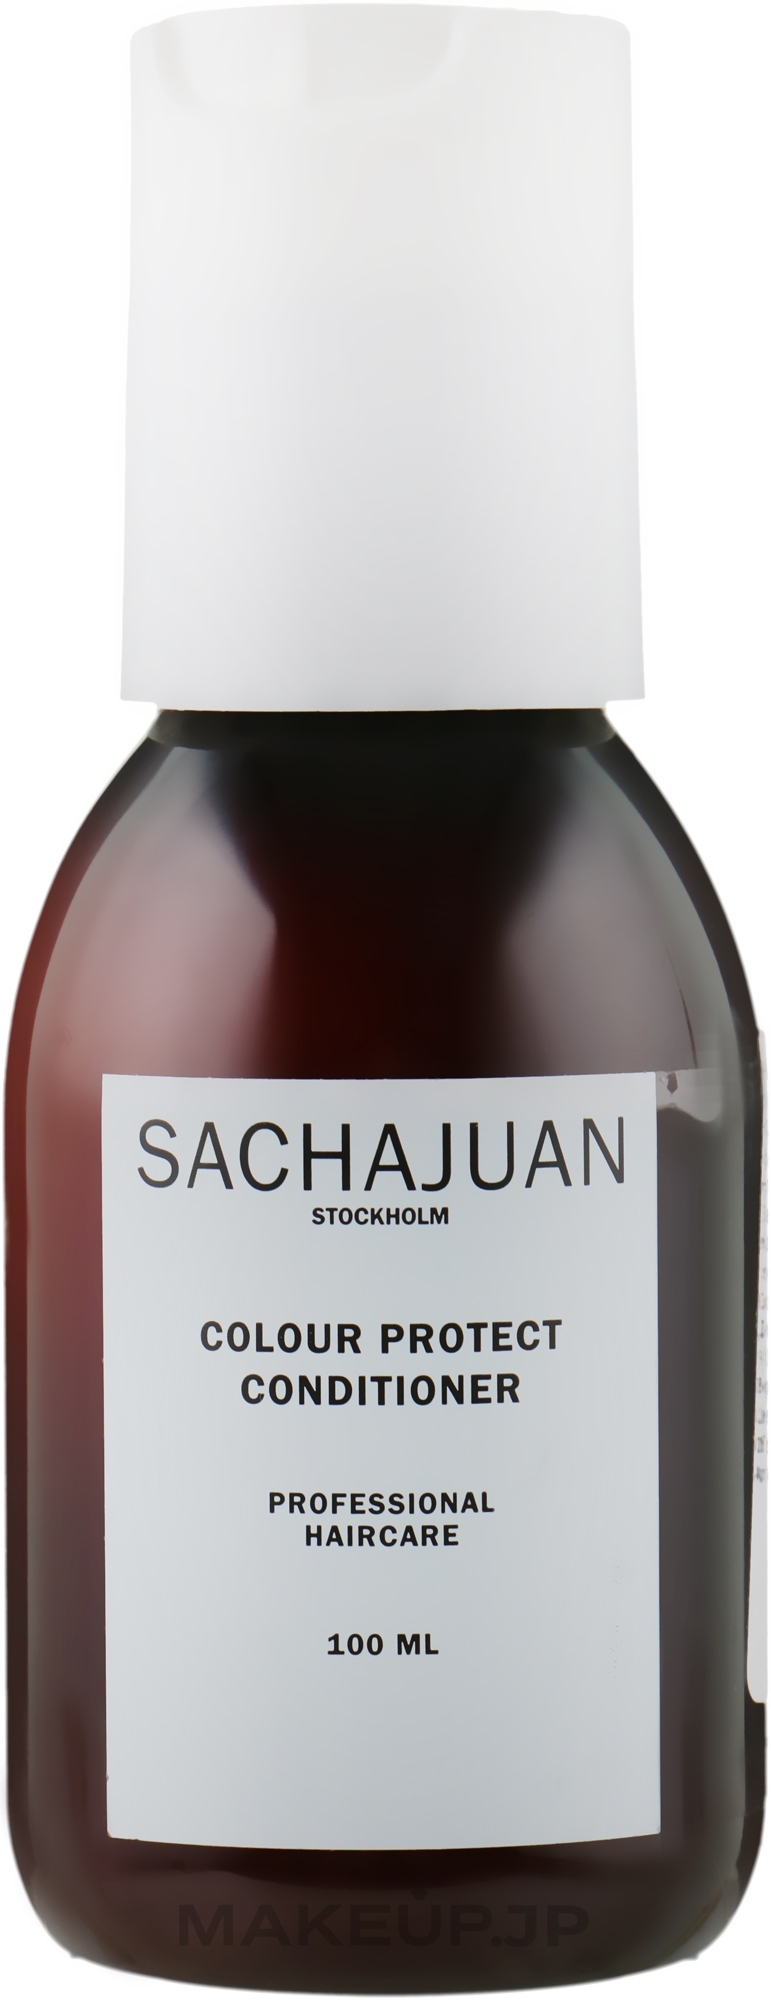 Color-Treated Hair Conditioner - Sachajuan Stockholm Color Protect Conditioner  — photo 100 ml